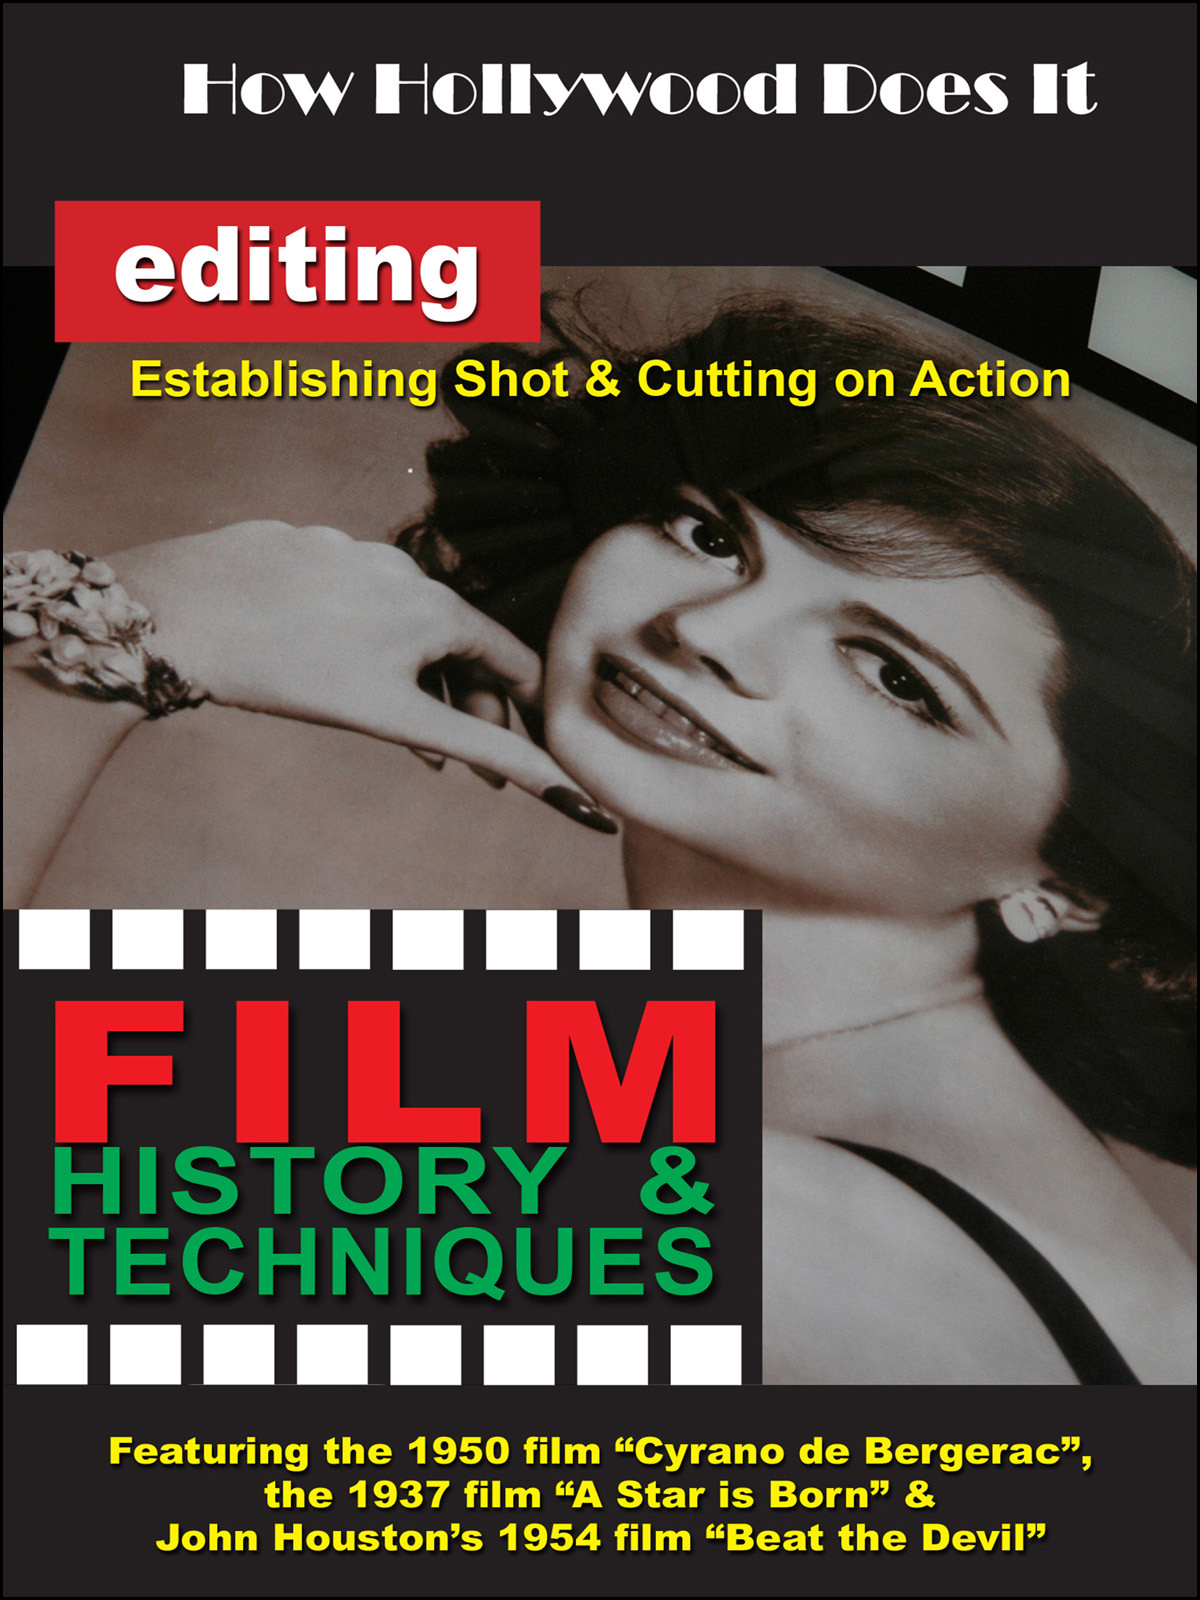 F2713 - How Hollywood Does It - Film History & Techniques of The Editing Process